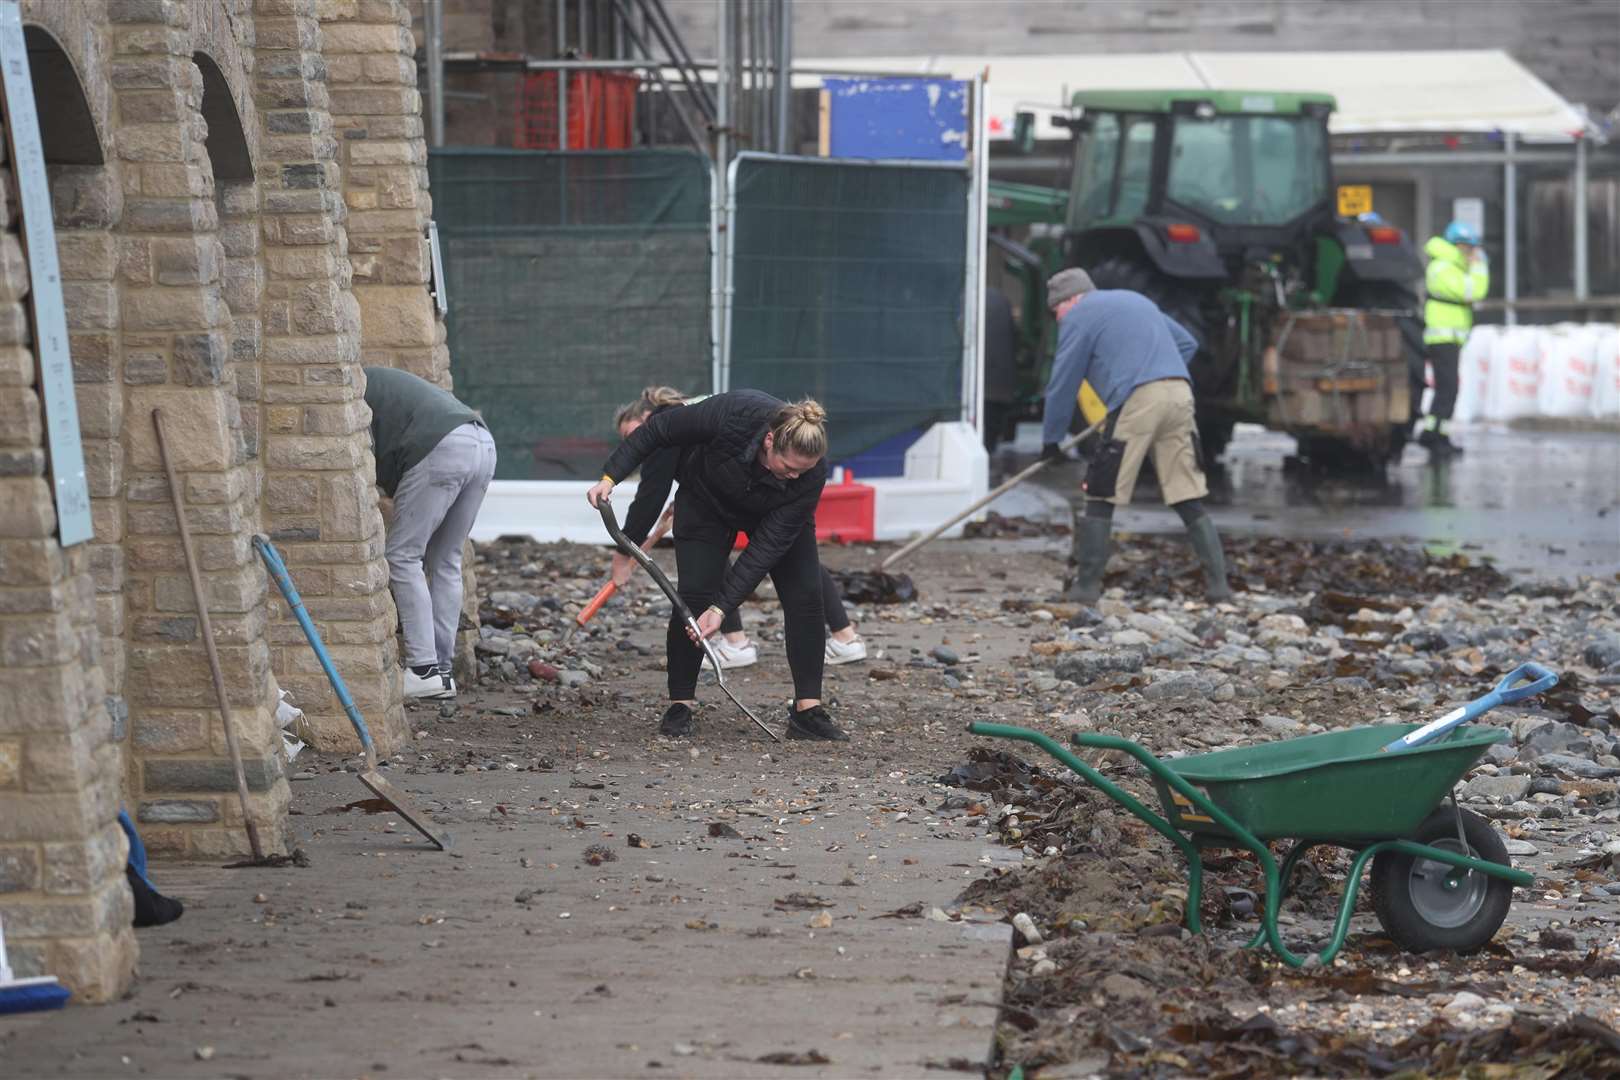 People clean up stones brought in by the sea in Swanage (Steve Parsons/PA)